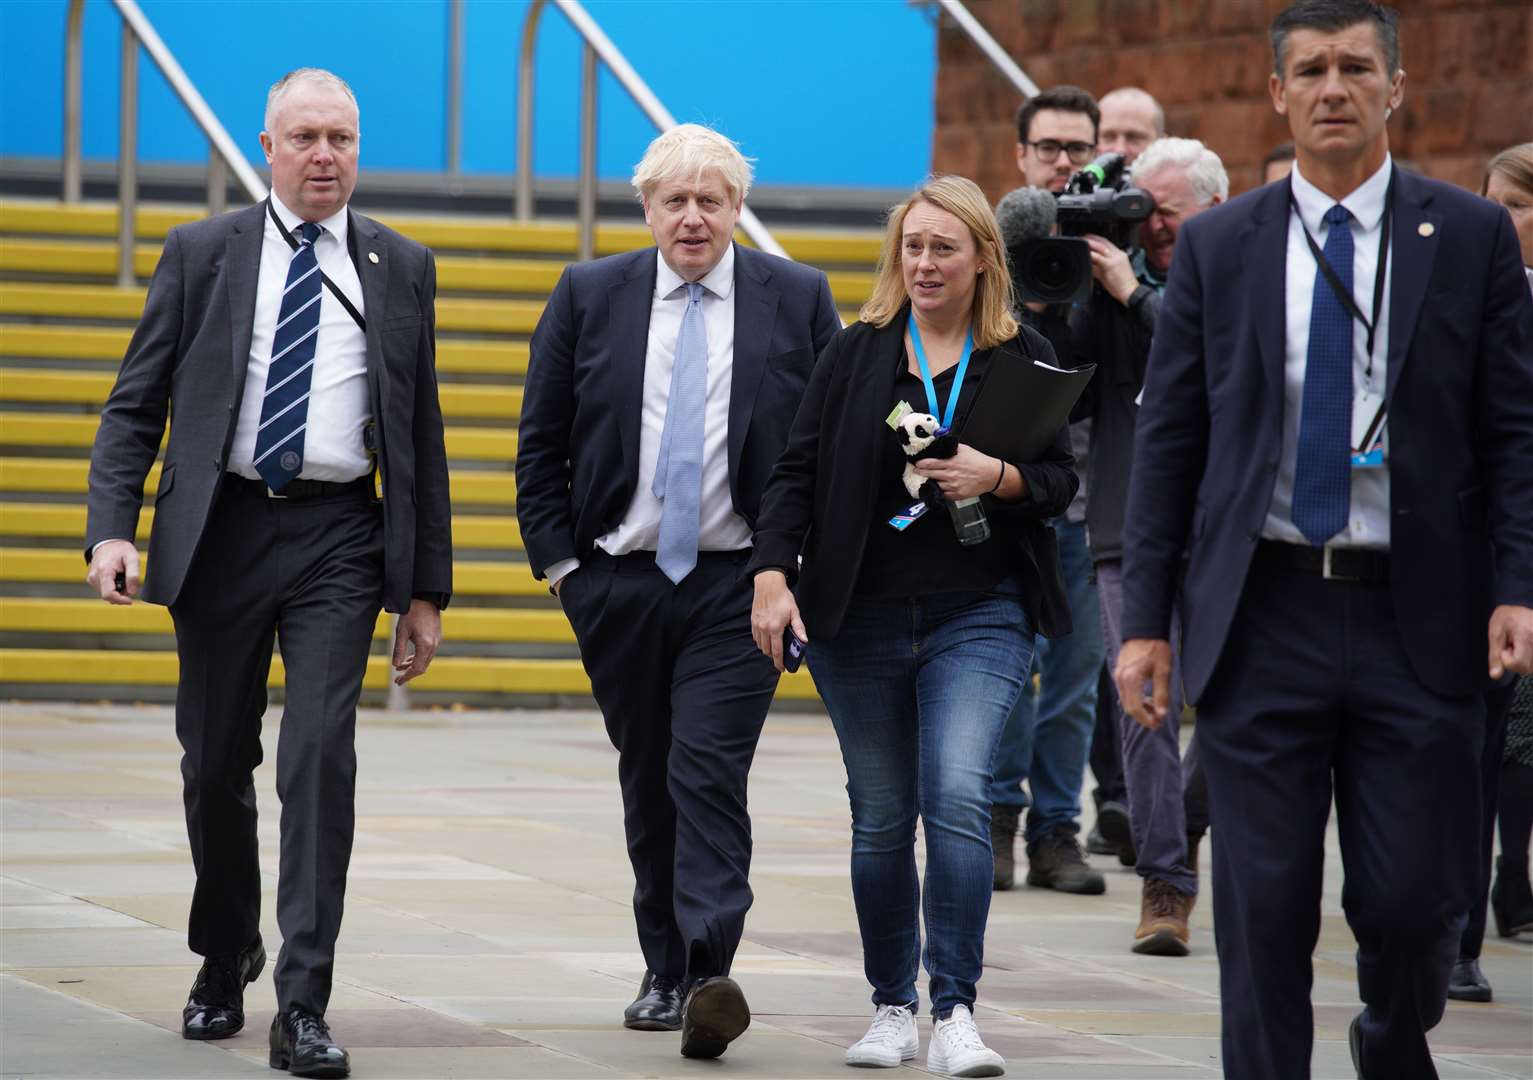 Prime Minister Boris Johnson at the Tory party conference (Peter Byrne/PA)